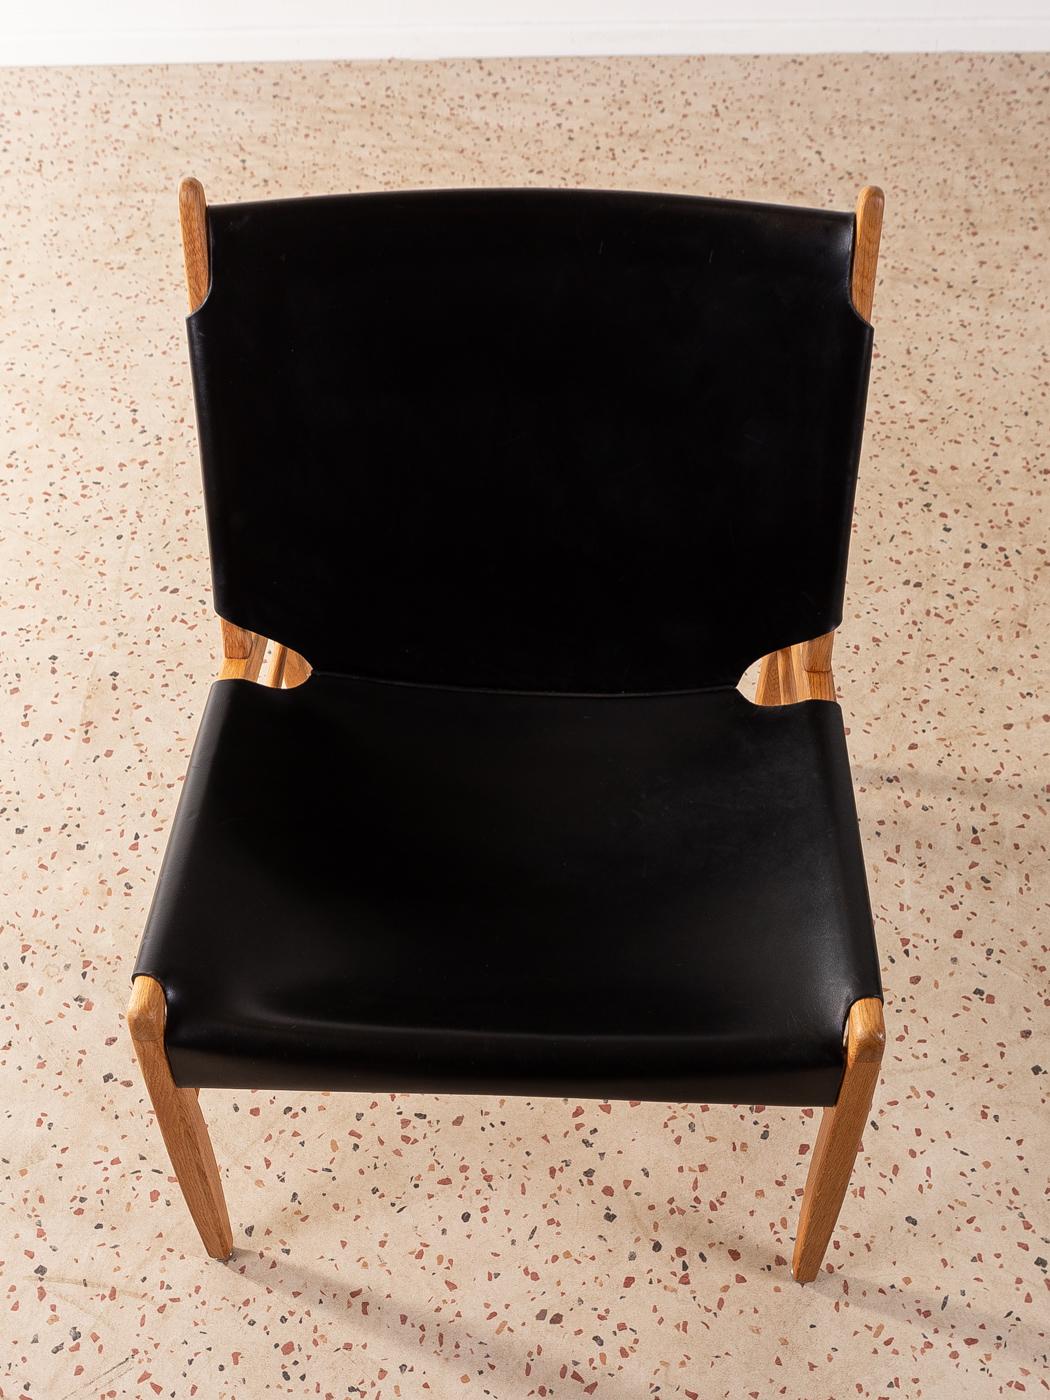 Mid-20th Century  Chimney Chair Model 1192 by Franz Xaver Lutz  For Sale